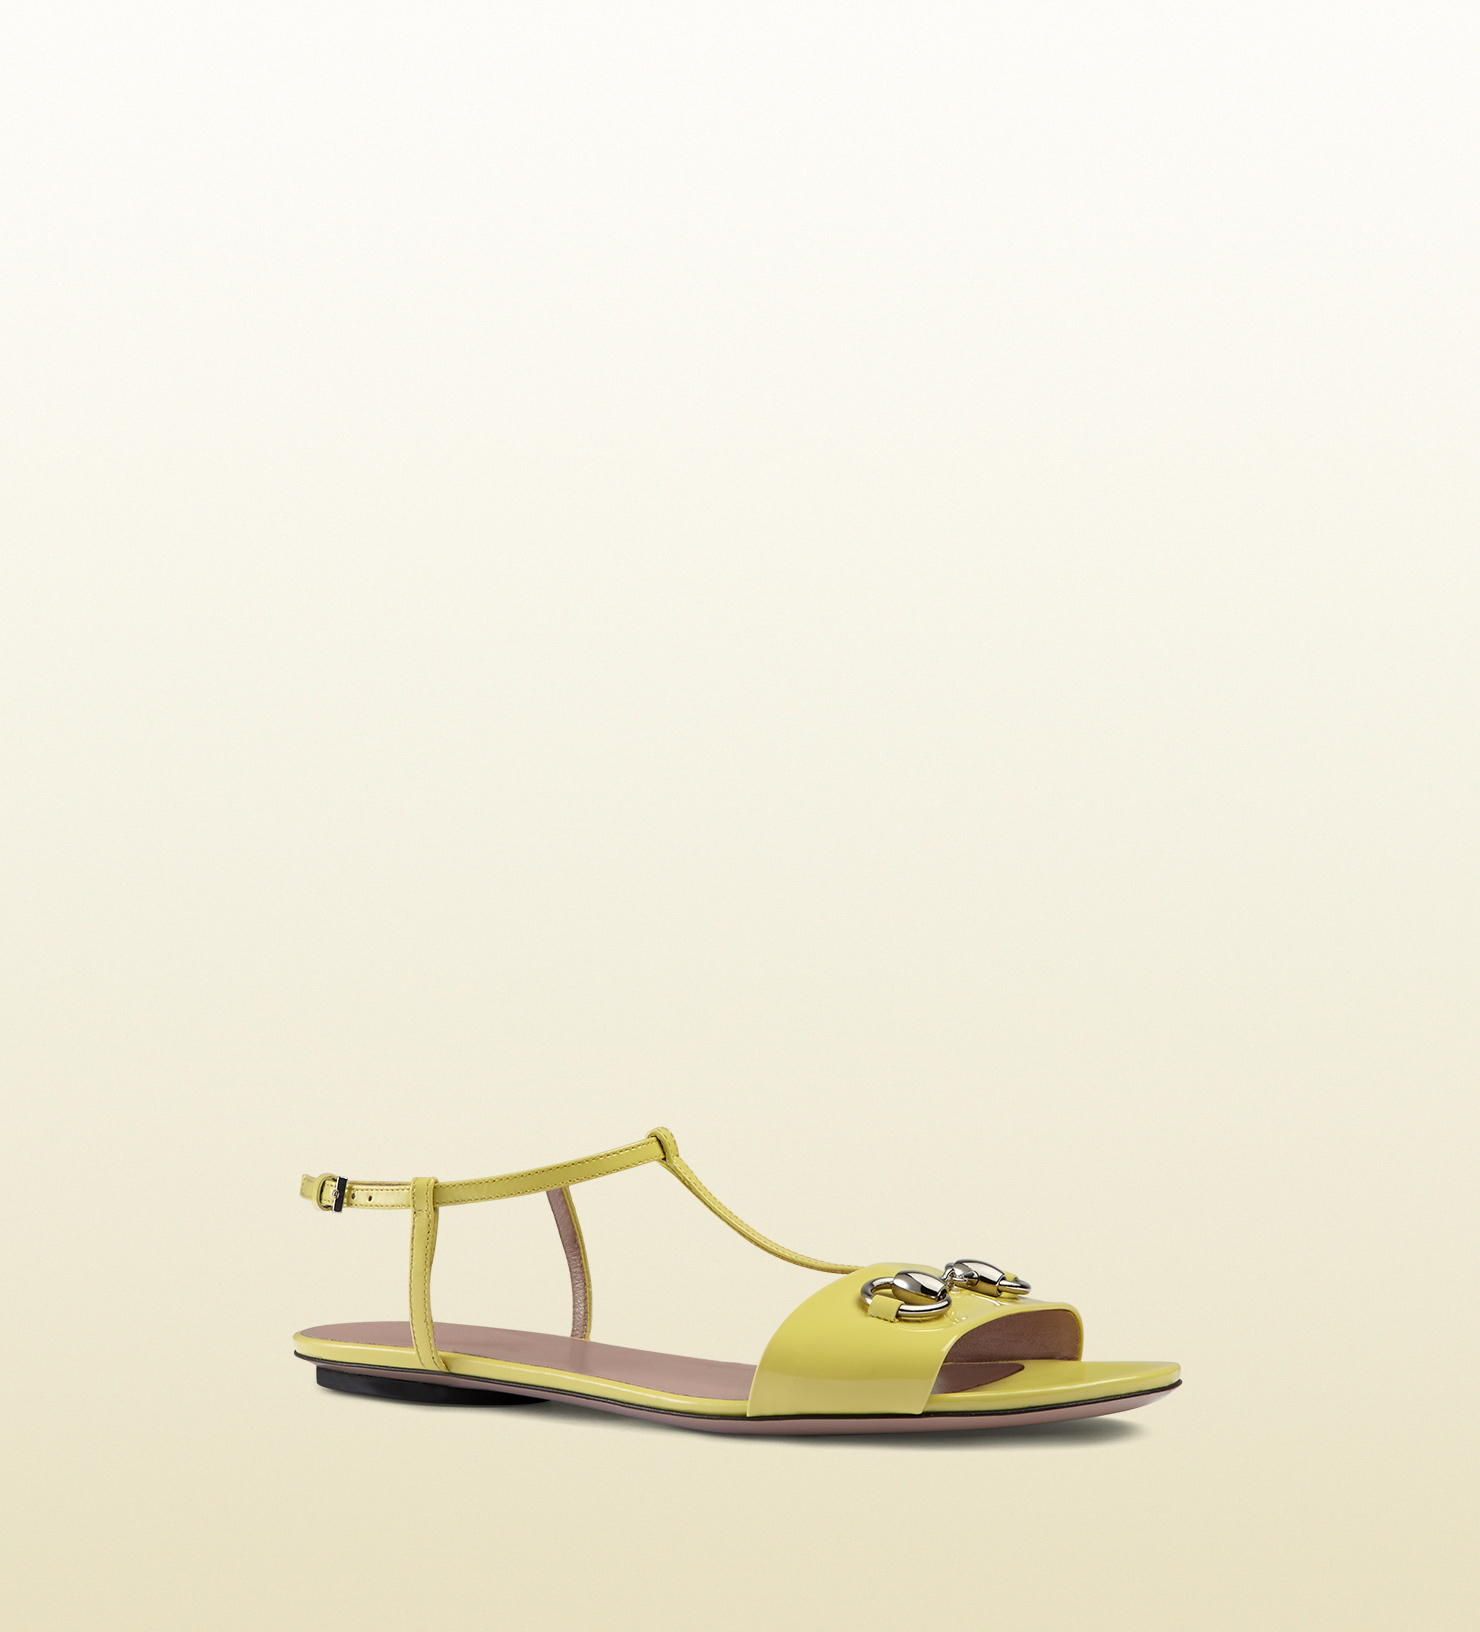 Gucci Patent Leather T-strap Sandal in Yellow